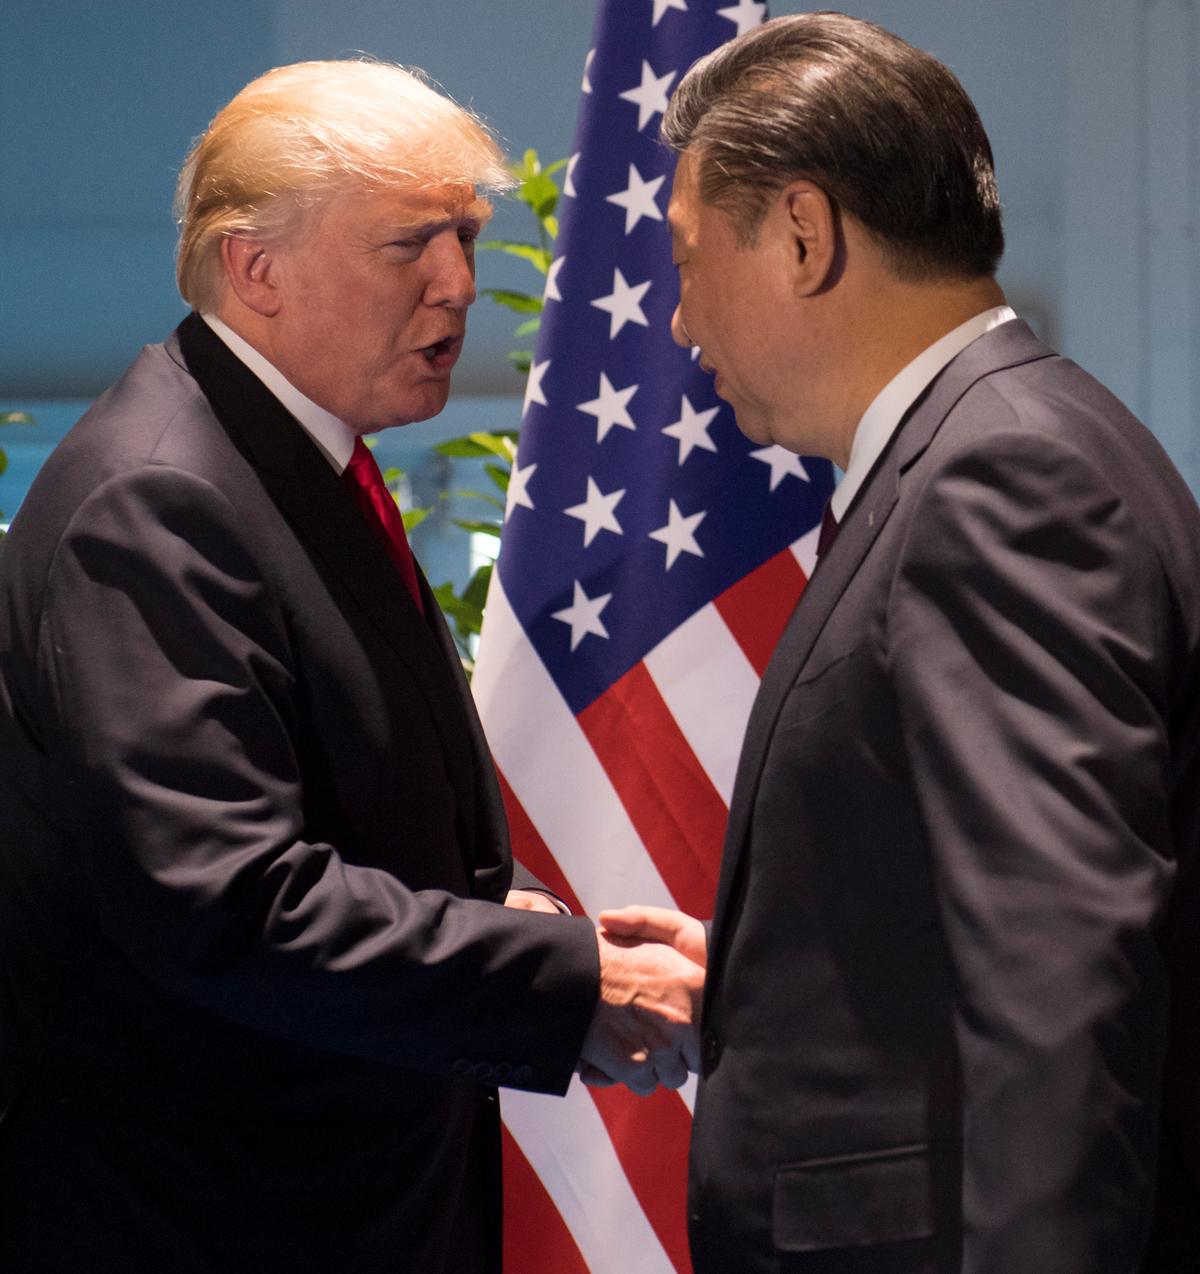 President Donald Trump and Chinese leader Xi Jinping (R) shake hands prior to a meeting on the sidelines of the G20 Summit in Hamburg, Germany, on July 8, 2017. (Saul Loeb/AFP/Getty Images)